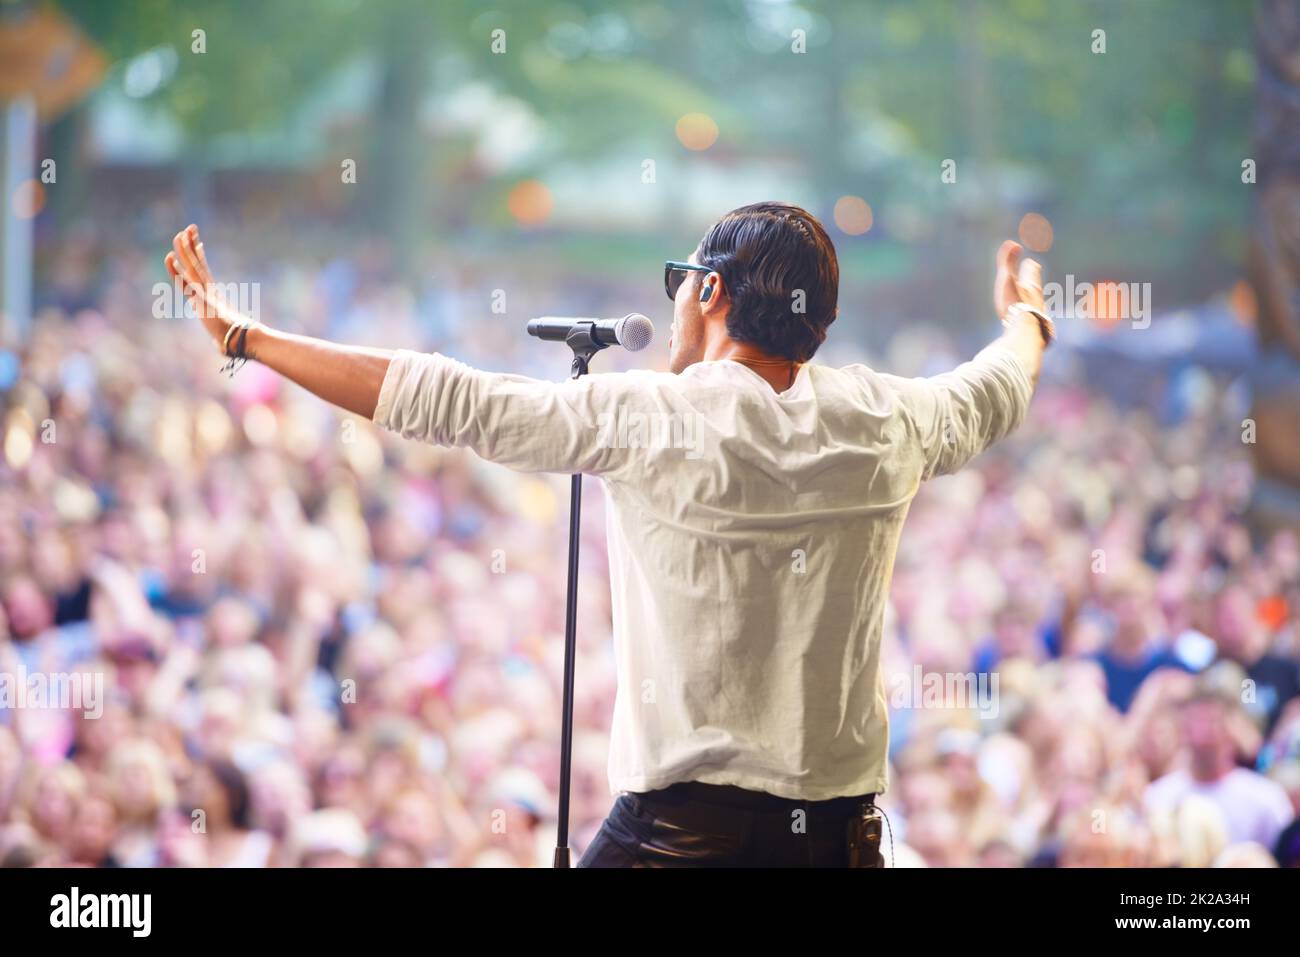 Charismatic frontman. A singer performing on stage at an outdoor music festival. Stock Photo